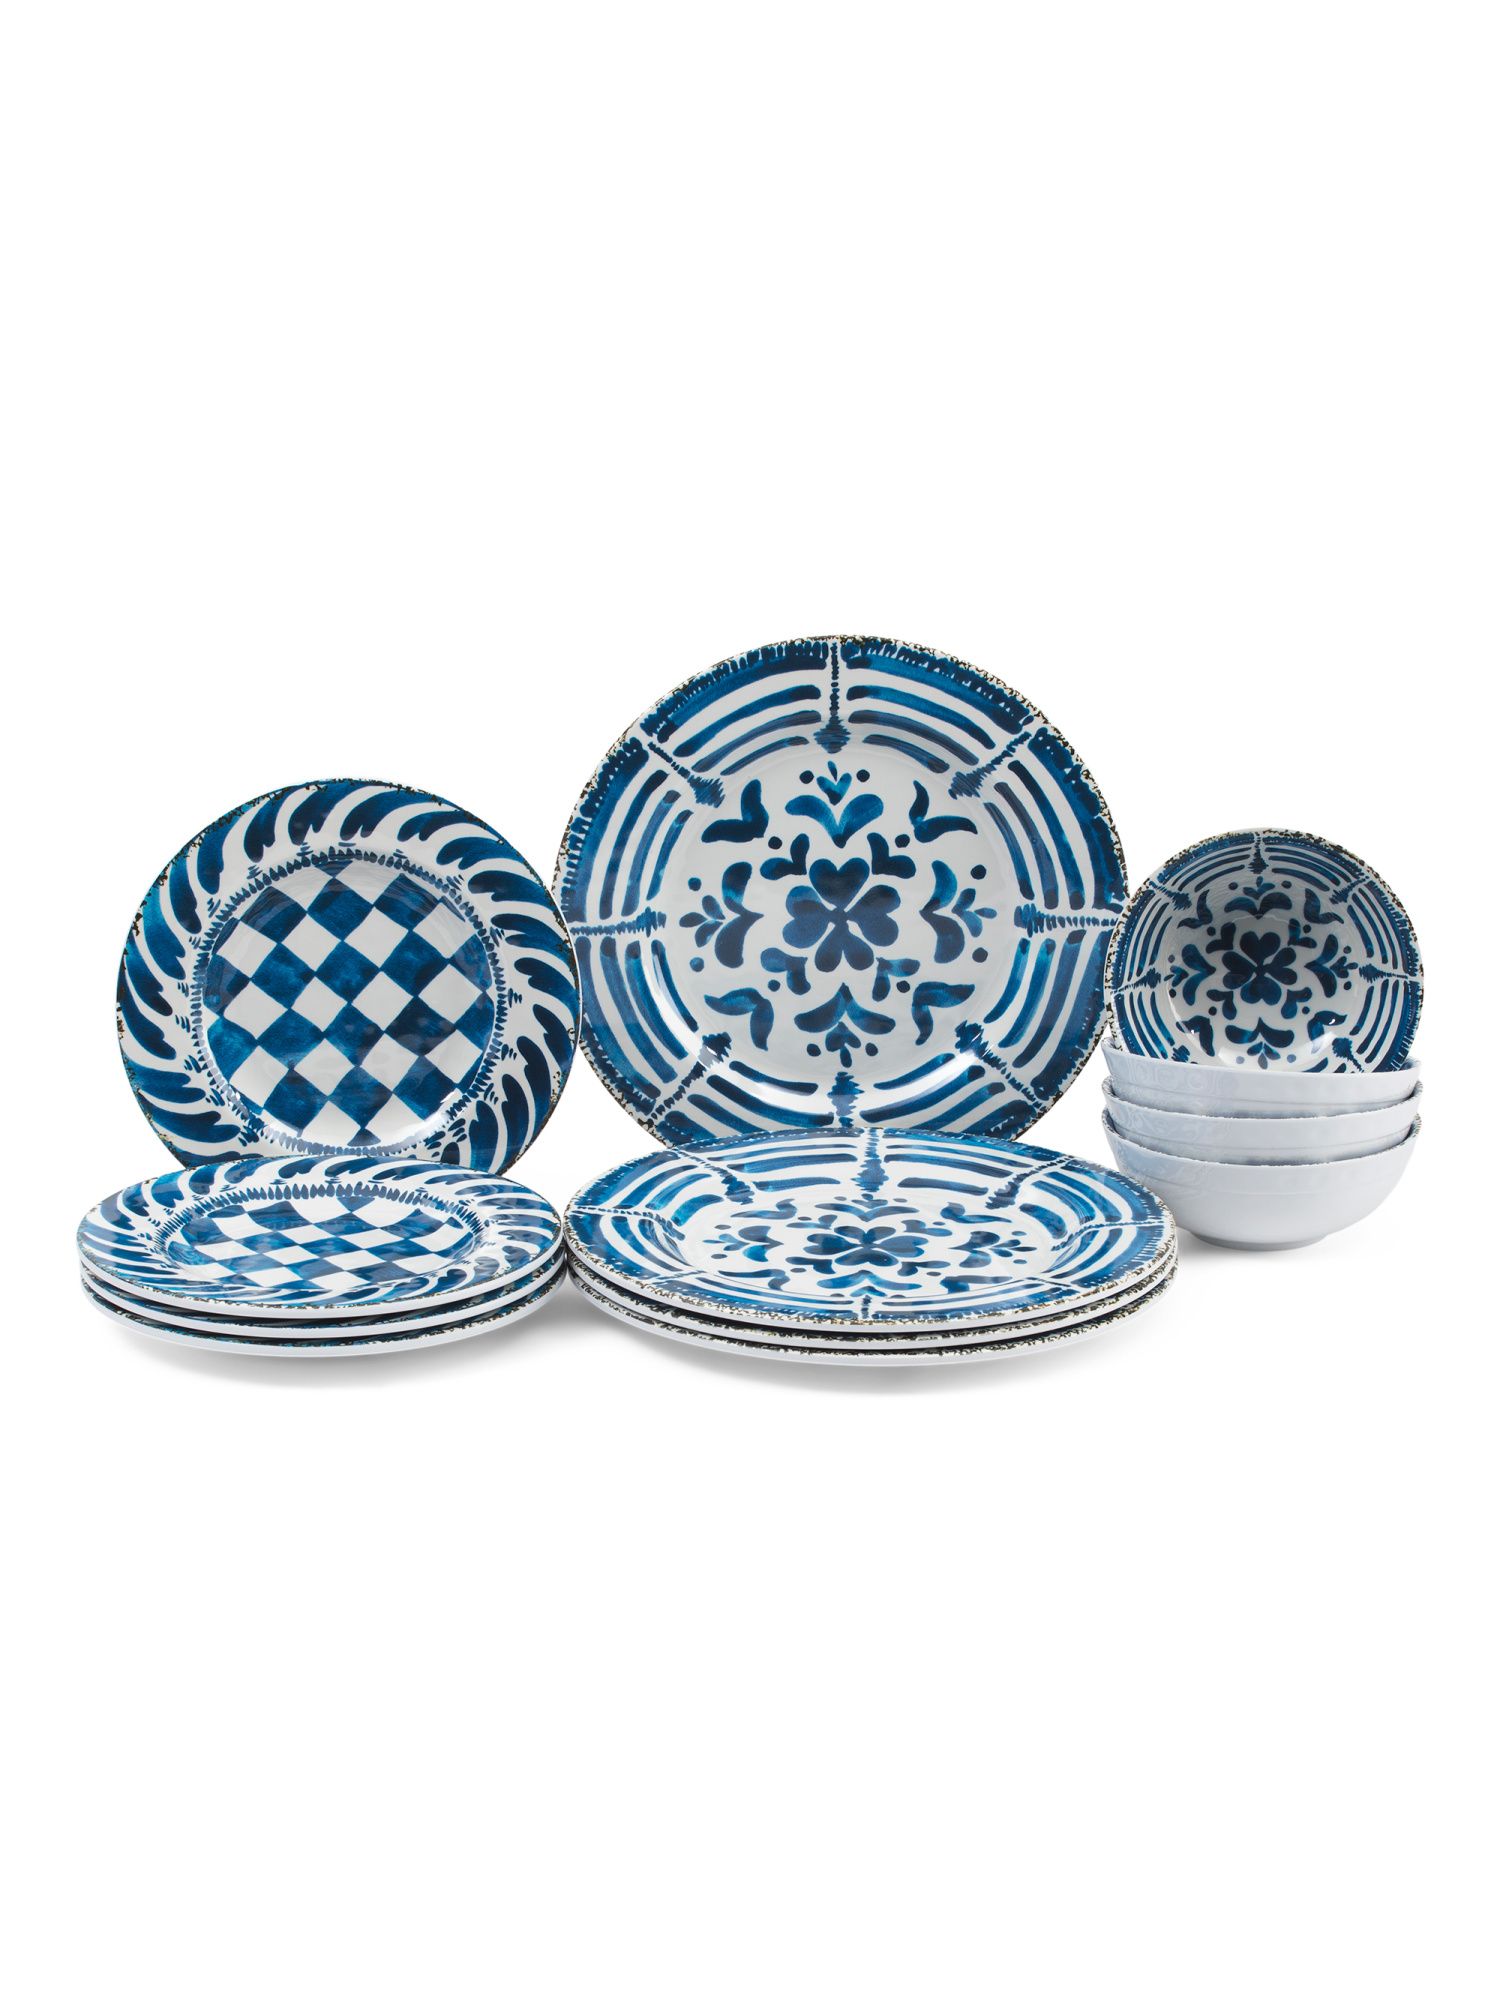 Merena Blue Print Plate Collection | TJ Maxx